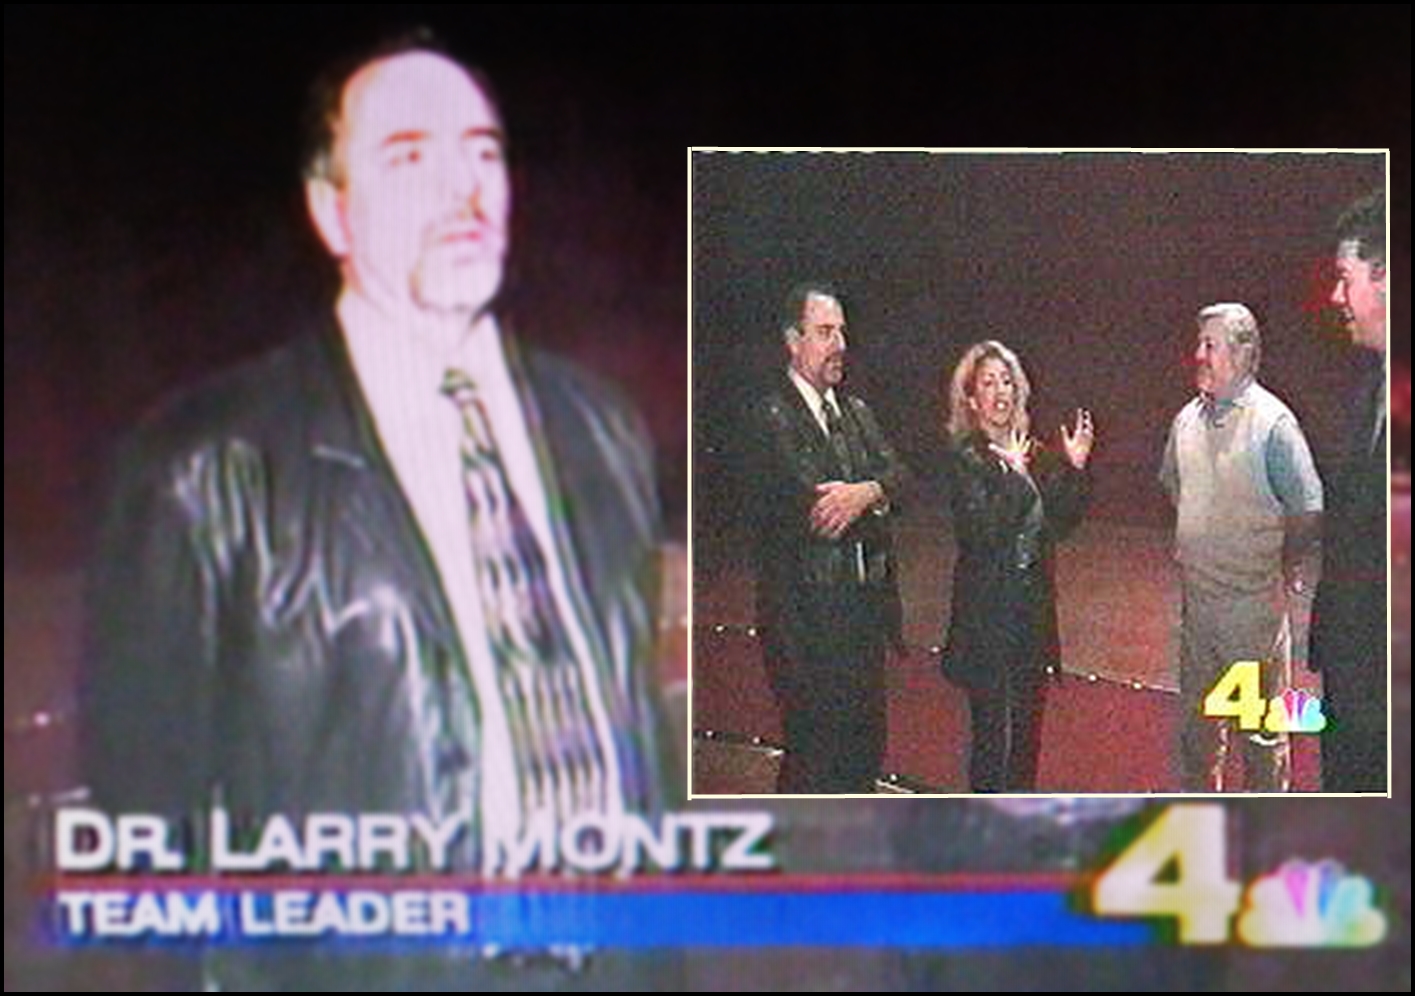 February 5, 2000 - NBC's Gordon Tokumatsu's report on Parapsychologist Dr. Larry Montz and the ISPR as the real-life models for NBC / Dreamwork's 